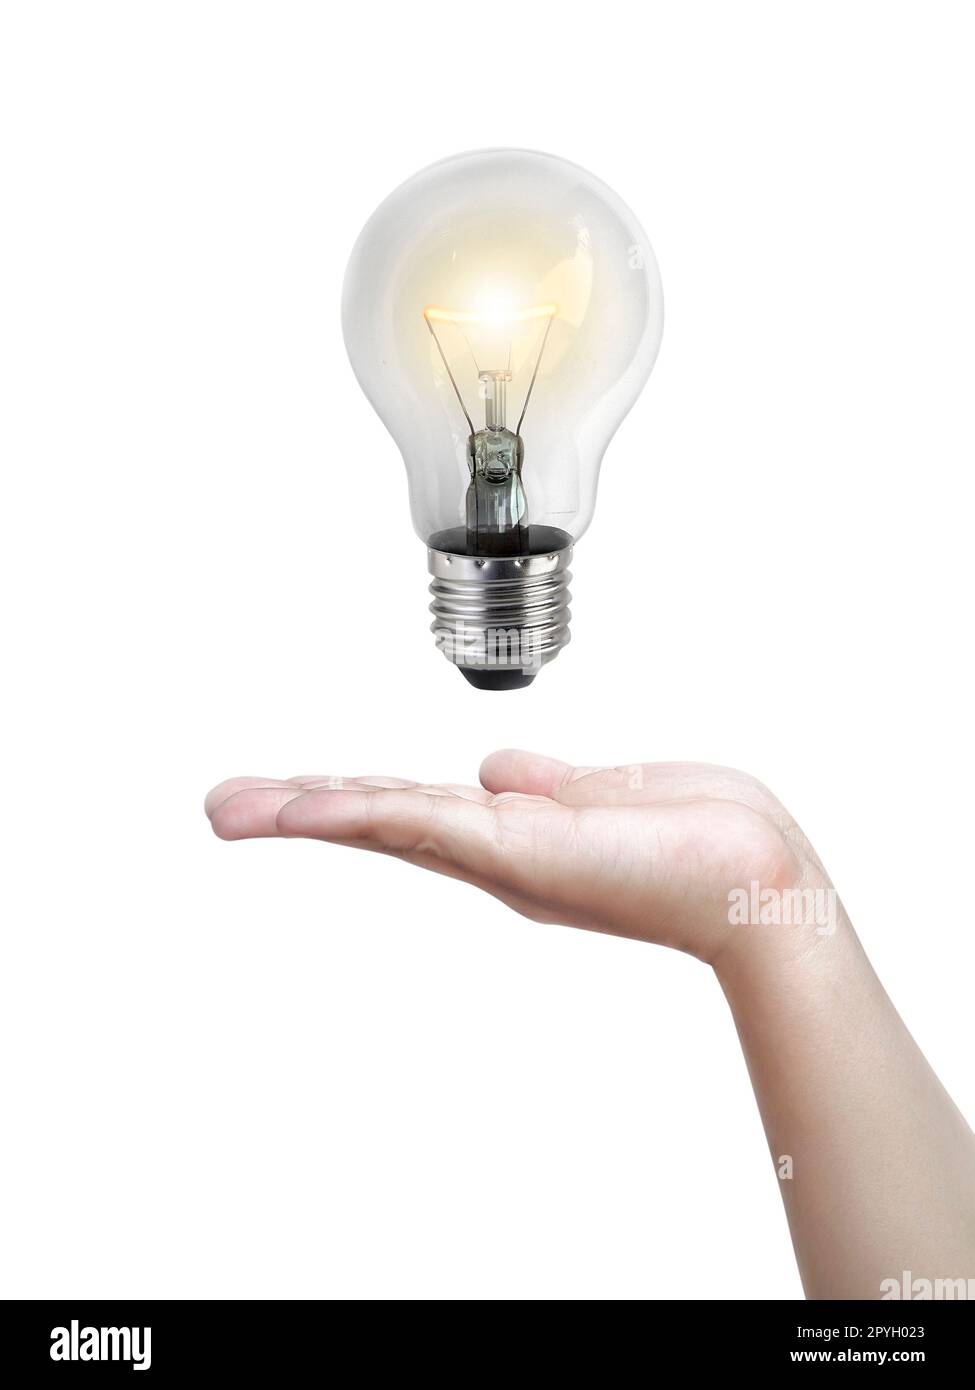 Light bulb in hand,Realistic photo image. Turn on tungsten light bulb with hand, isolated on white background Stock Photo